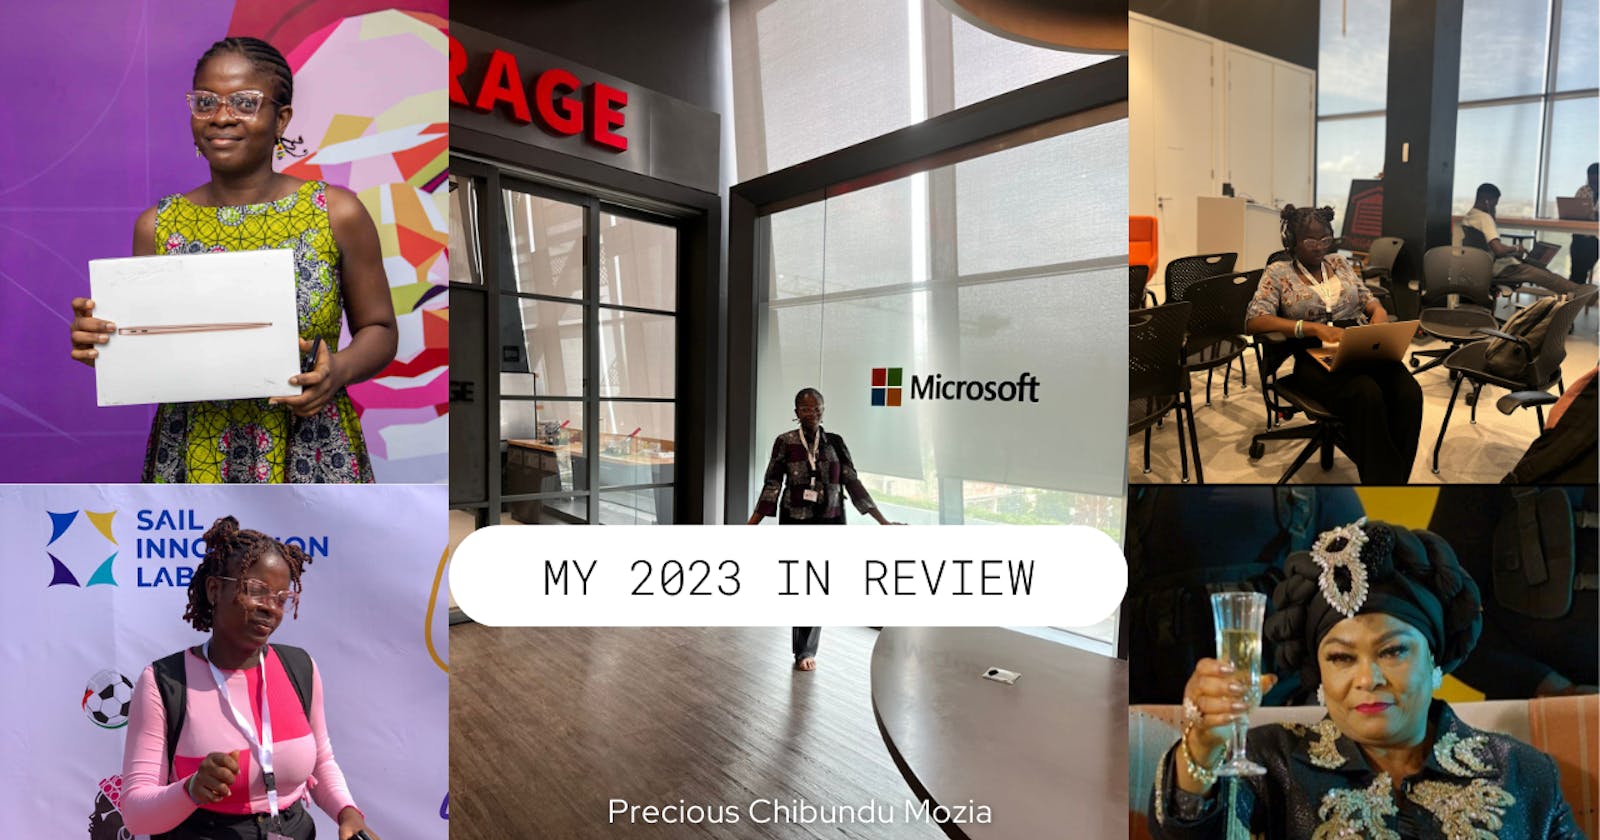 My 2023 Year In Review.